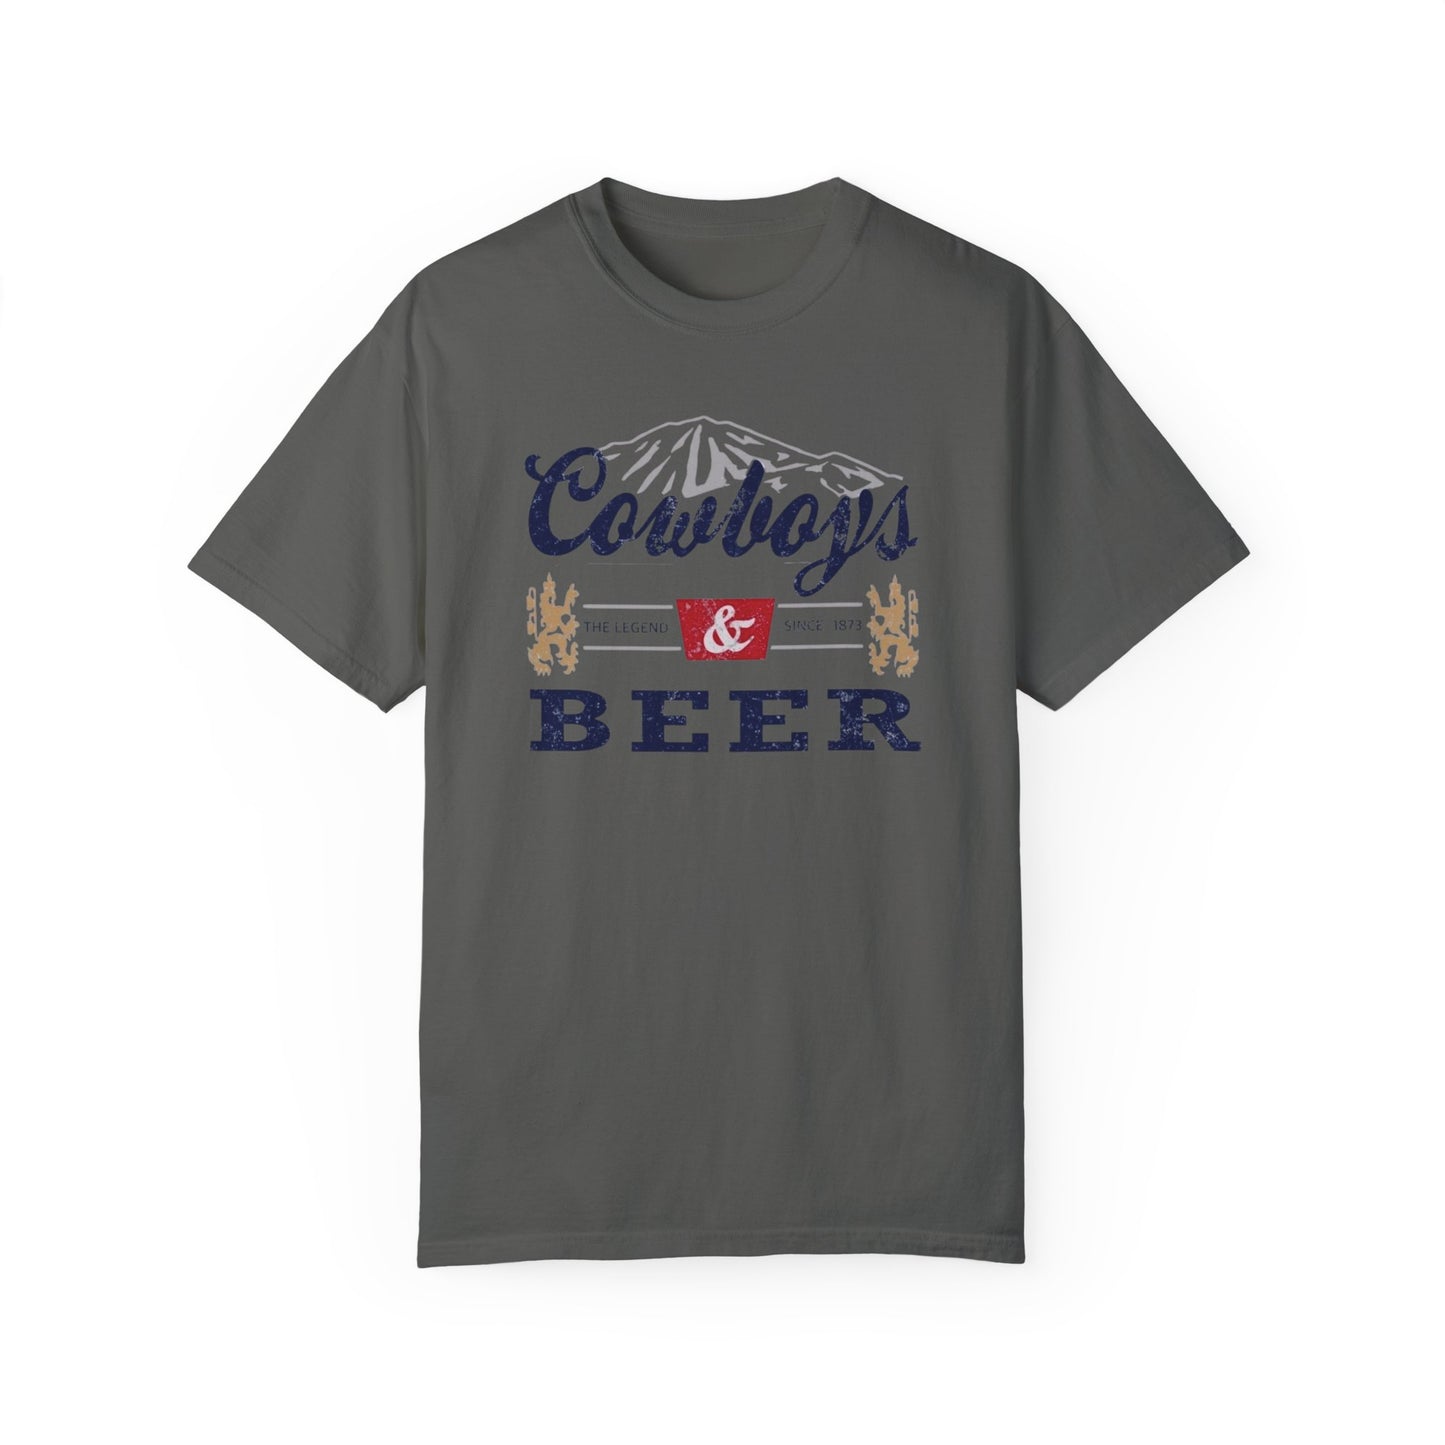 Comfort Colors® Cowboys and Beer, Trendy Tshirt. Oversized Tshirt, Coors, Cowboy, Cowgirl T-shirt, Country Rodeo Shirt, Beer Tee